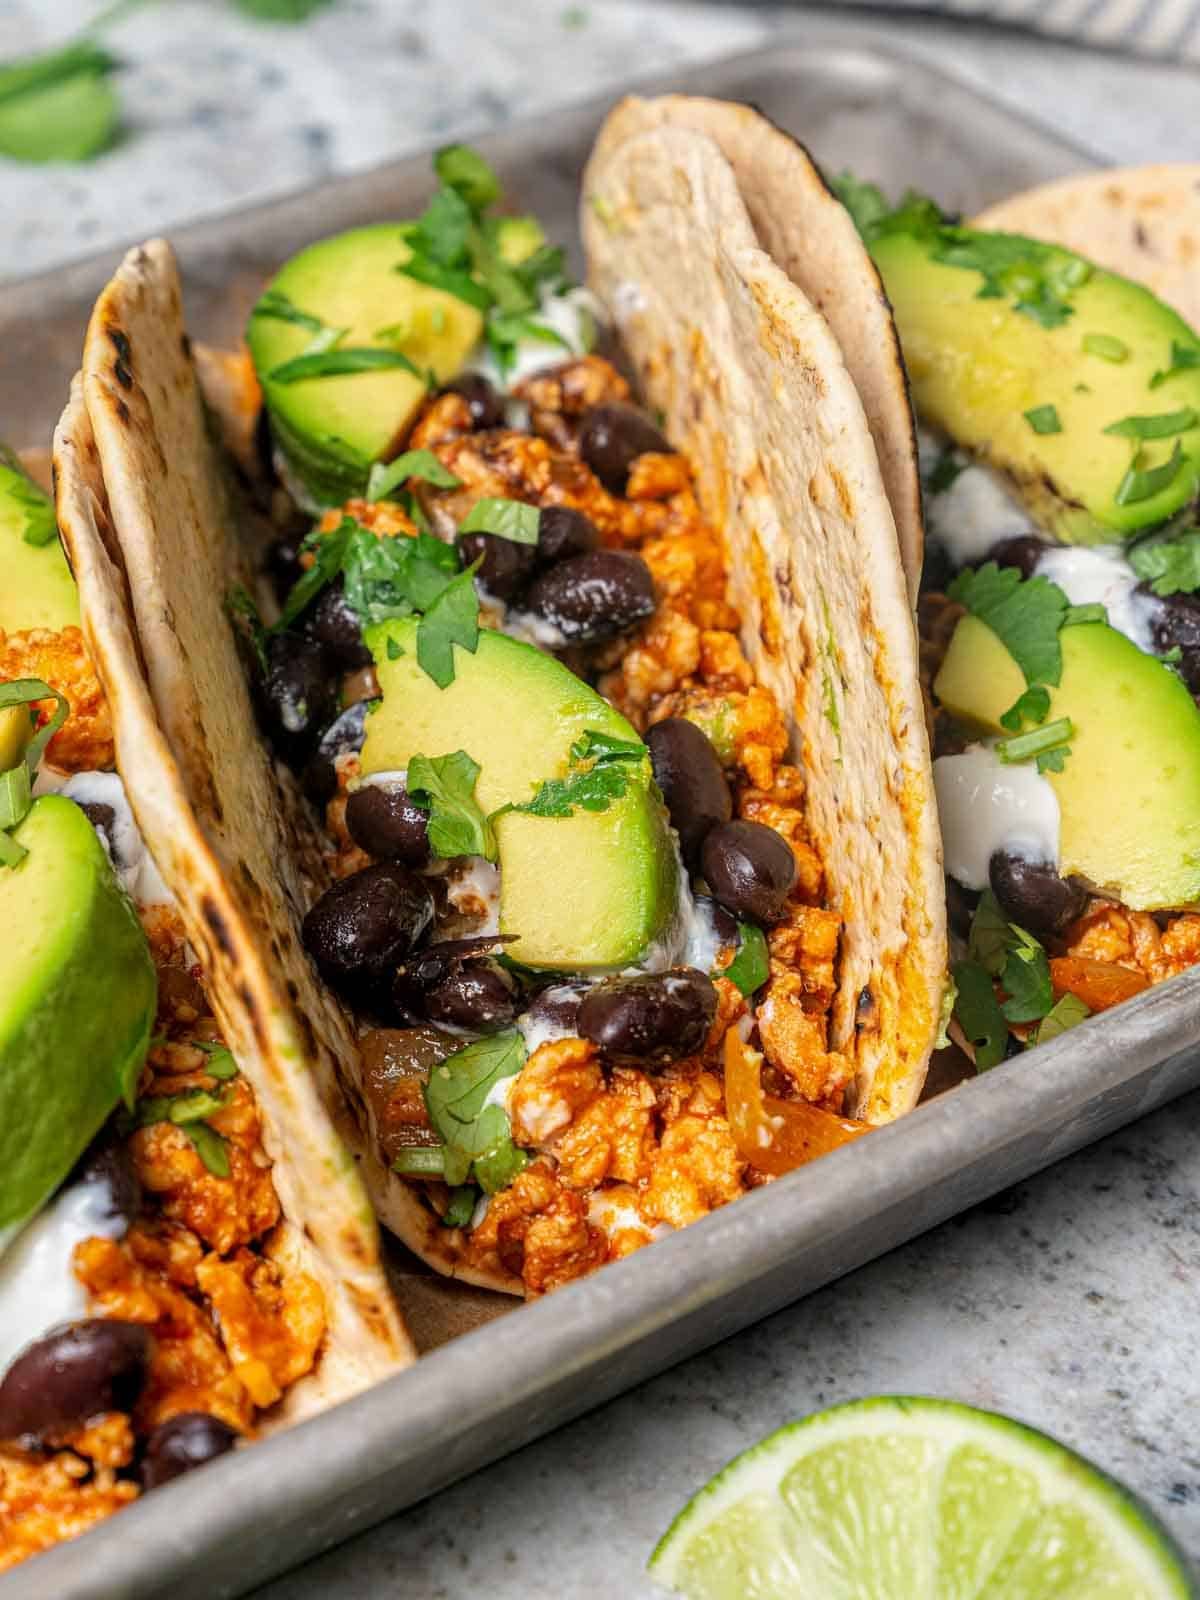 chipotle flavored chicken tacos.